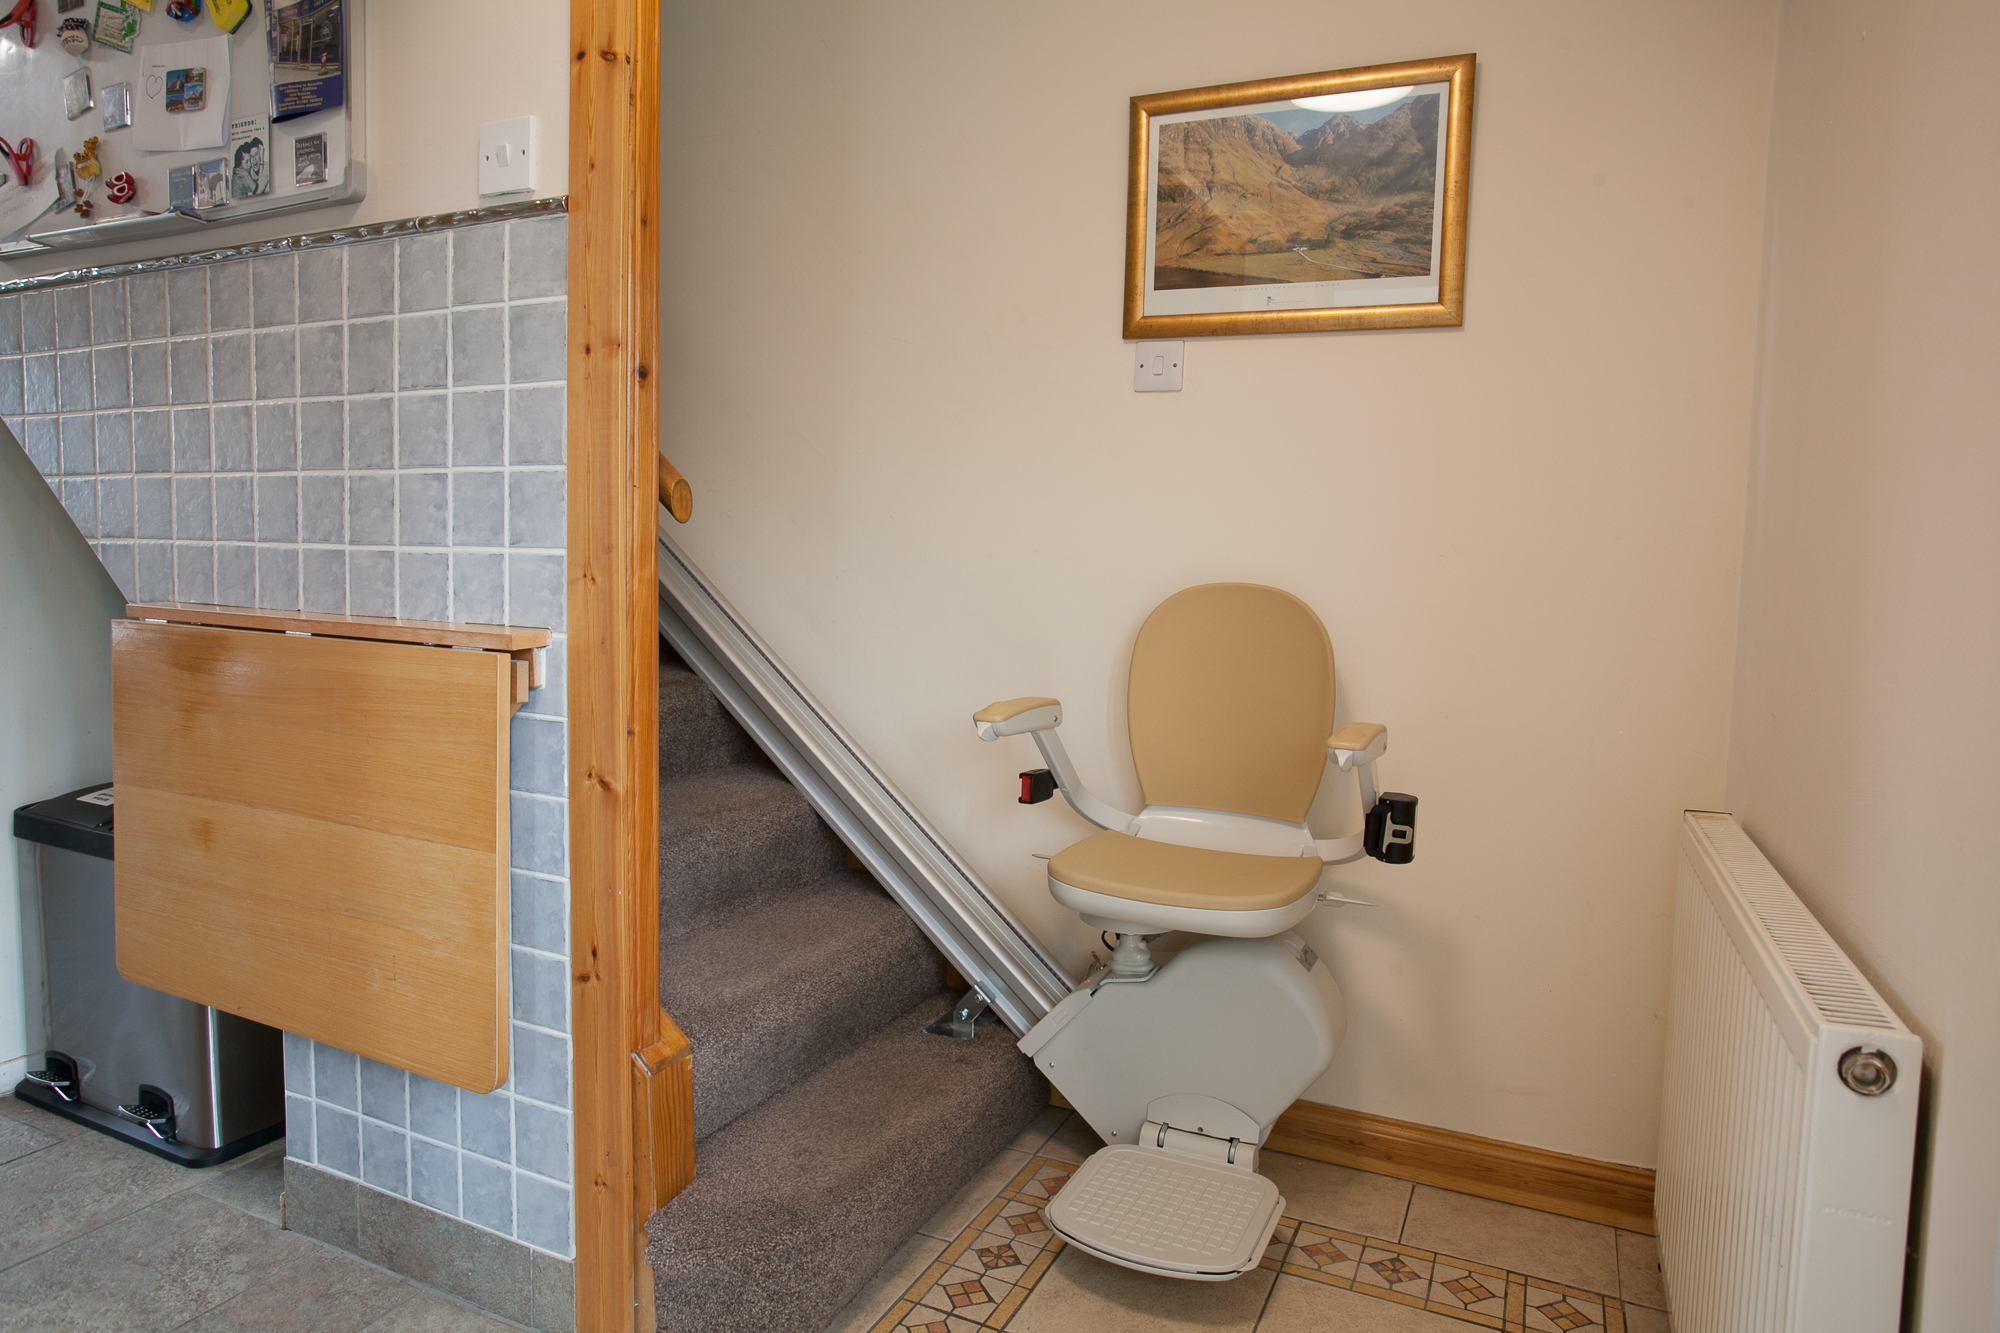 The stair lift